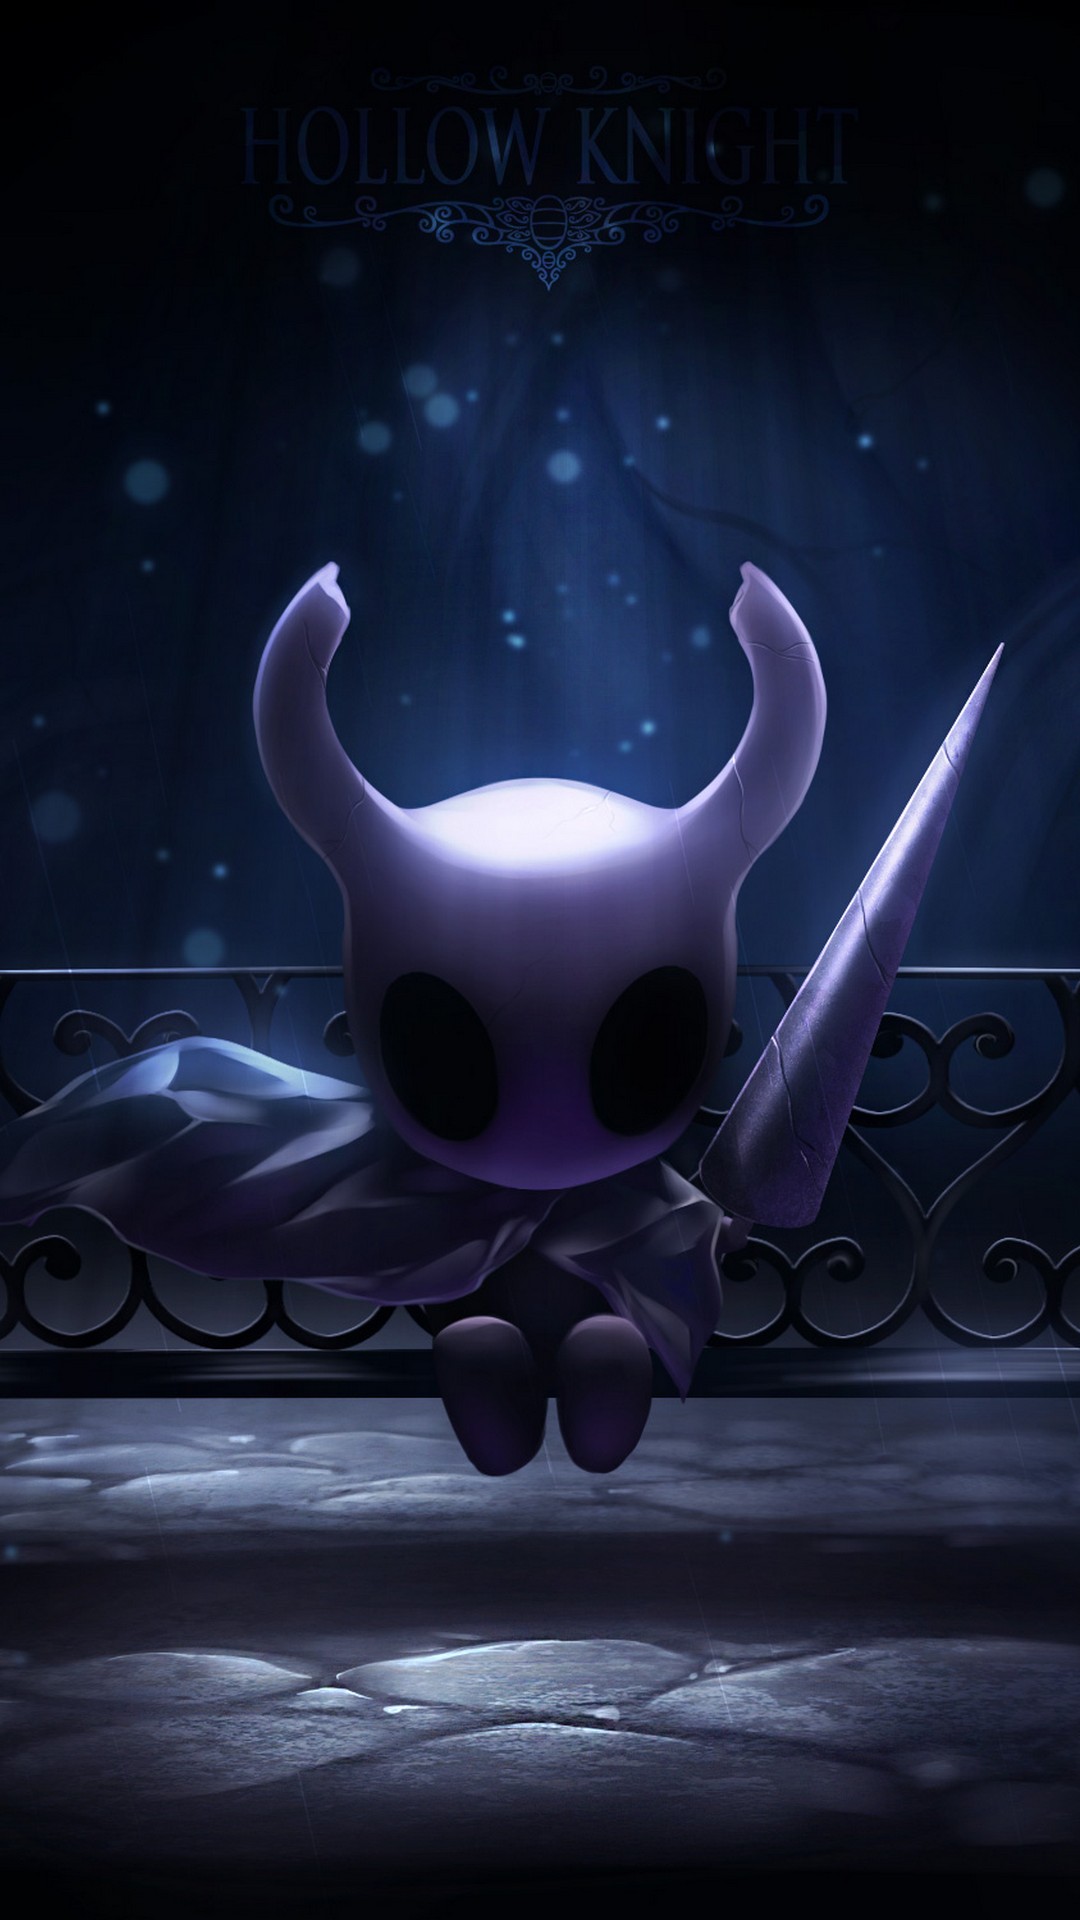 Hollow Knight HD Wallpapers For Android   2020 Android Wallpapers